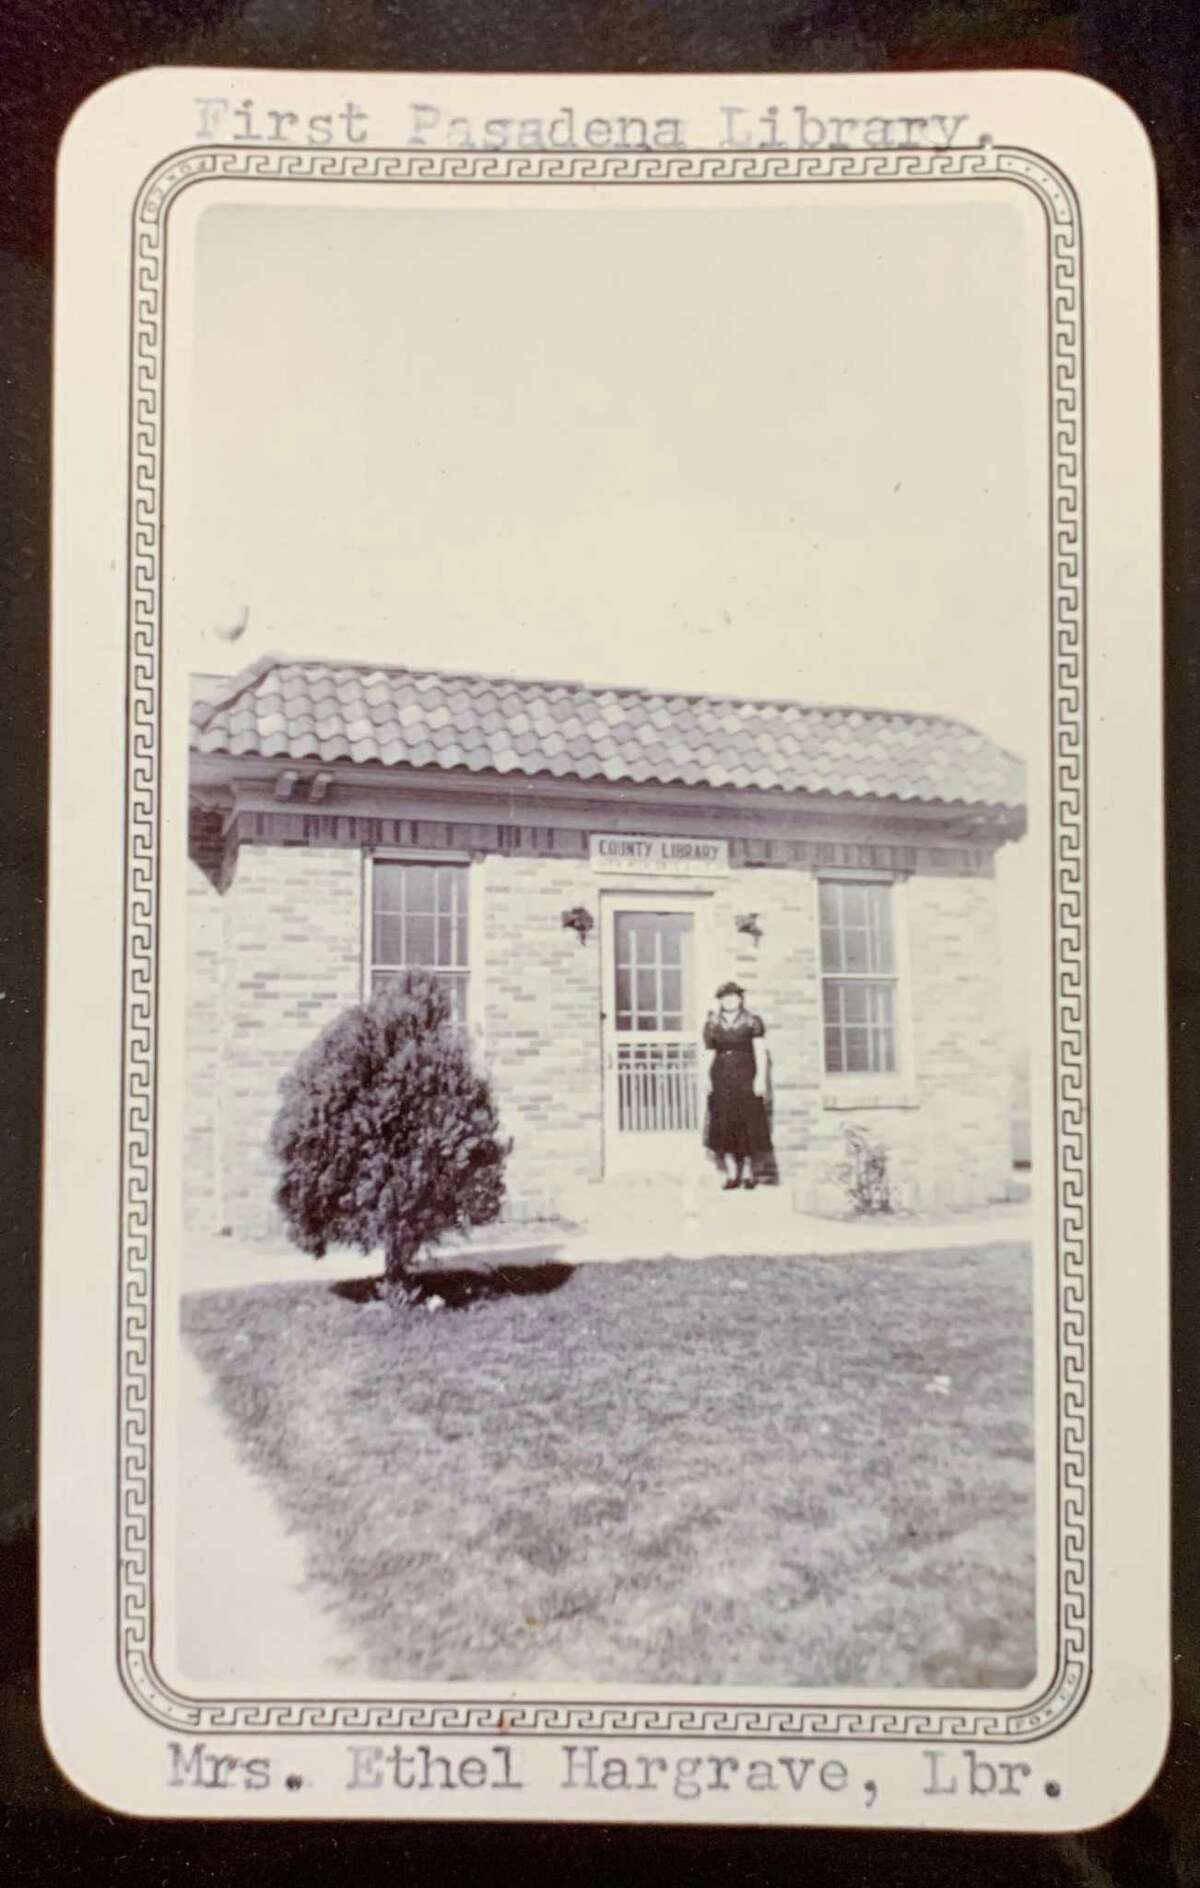 Ethel Blakesley Hargrave was a key figure through a significant growth spurt from 1926-1946 and helped establish the library as a community entity. At the time, the books came from Harris County and numbered between 100 and 200.